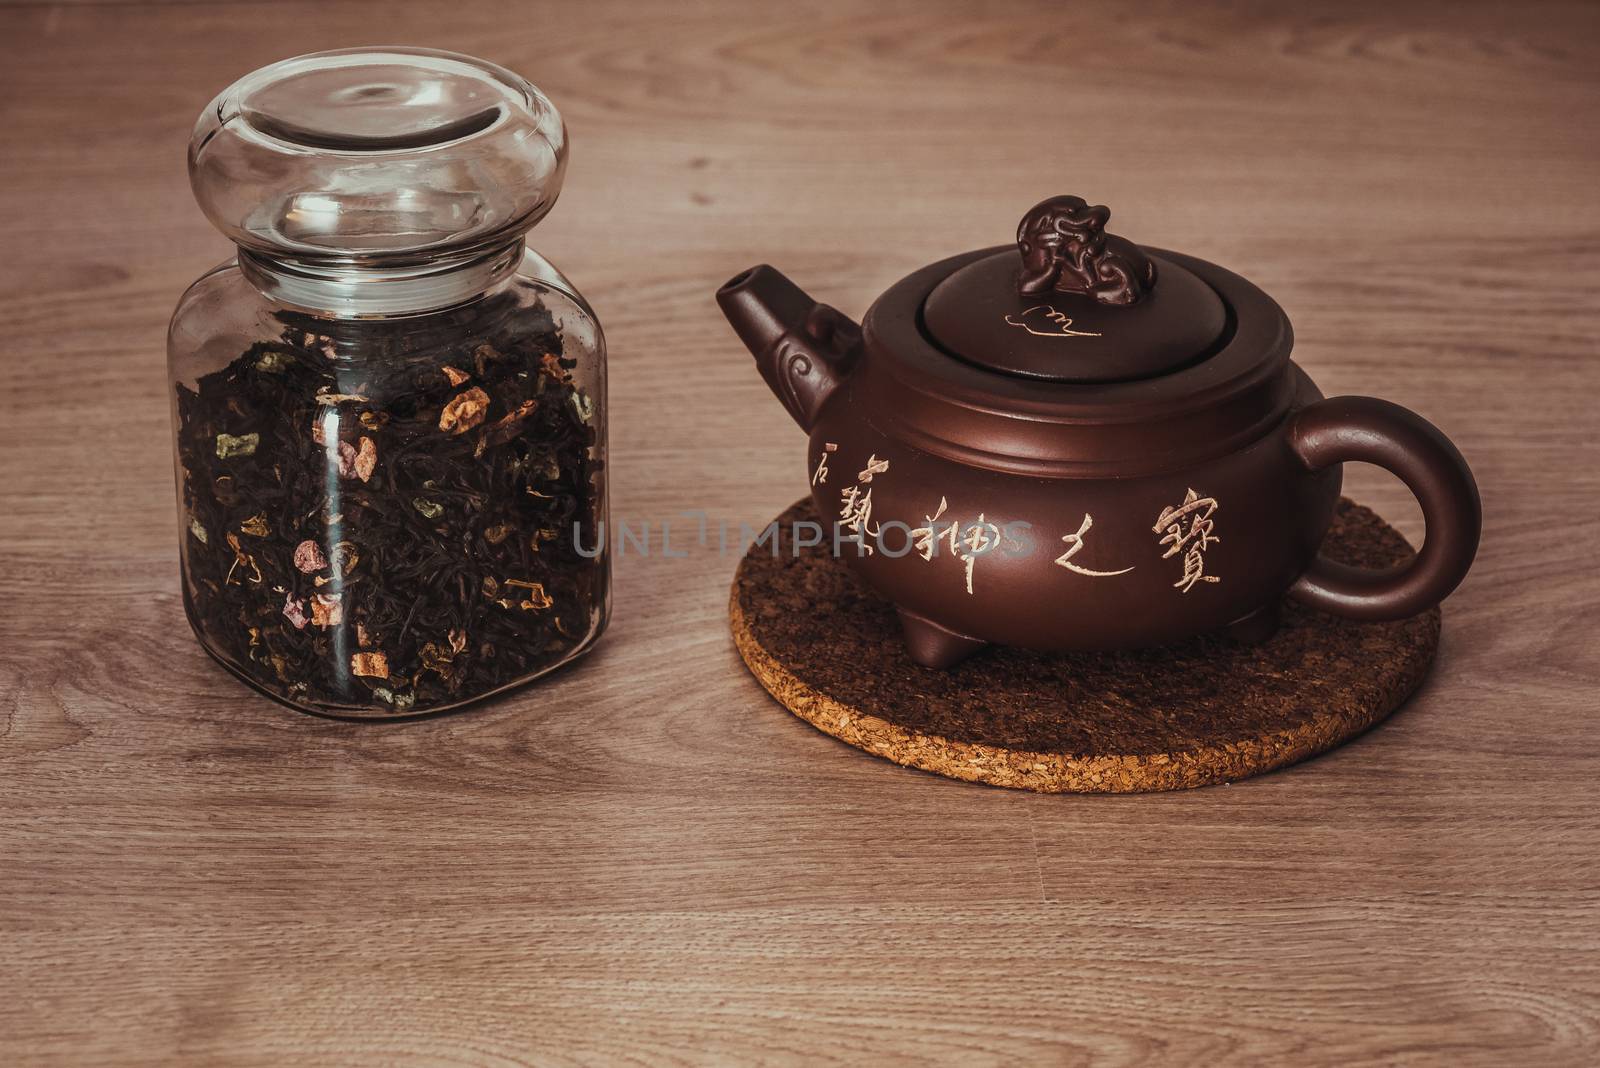 Asian teapot on stand and jar with fruit tea, inscription on the teapot: stone art treasures of God